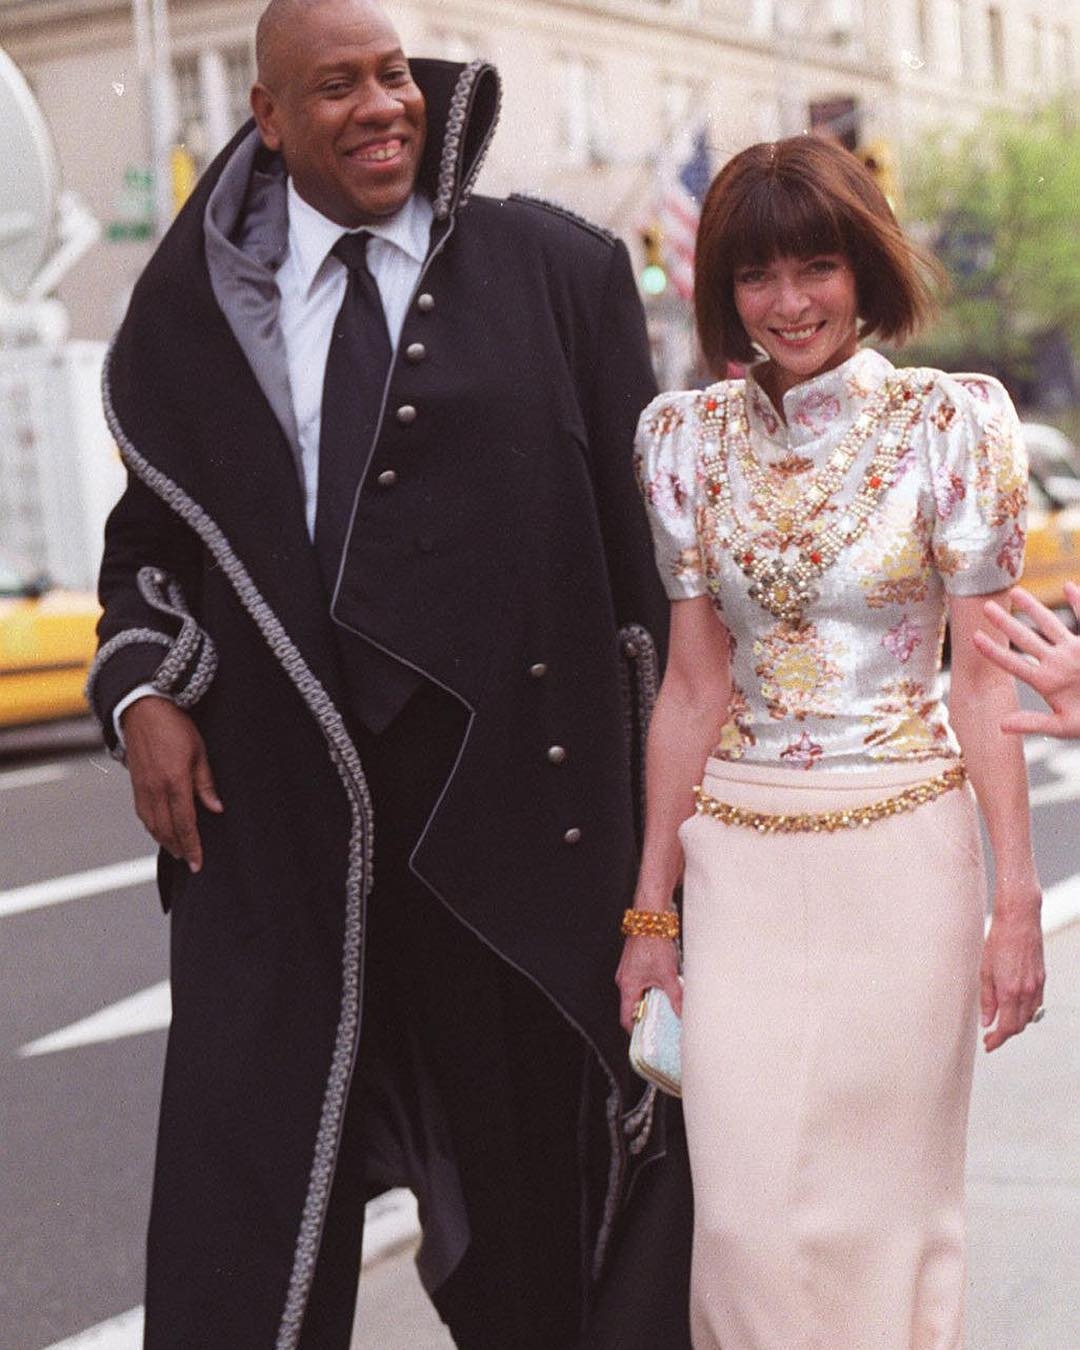 André Leon Talley Anna Wintour 2020 News Tom Ford Latest Memoir The Chiffon Trenches